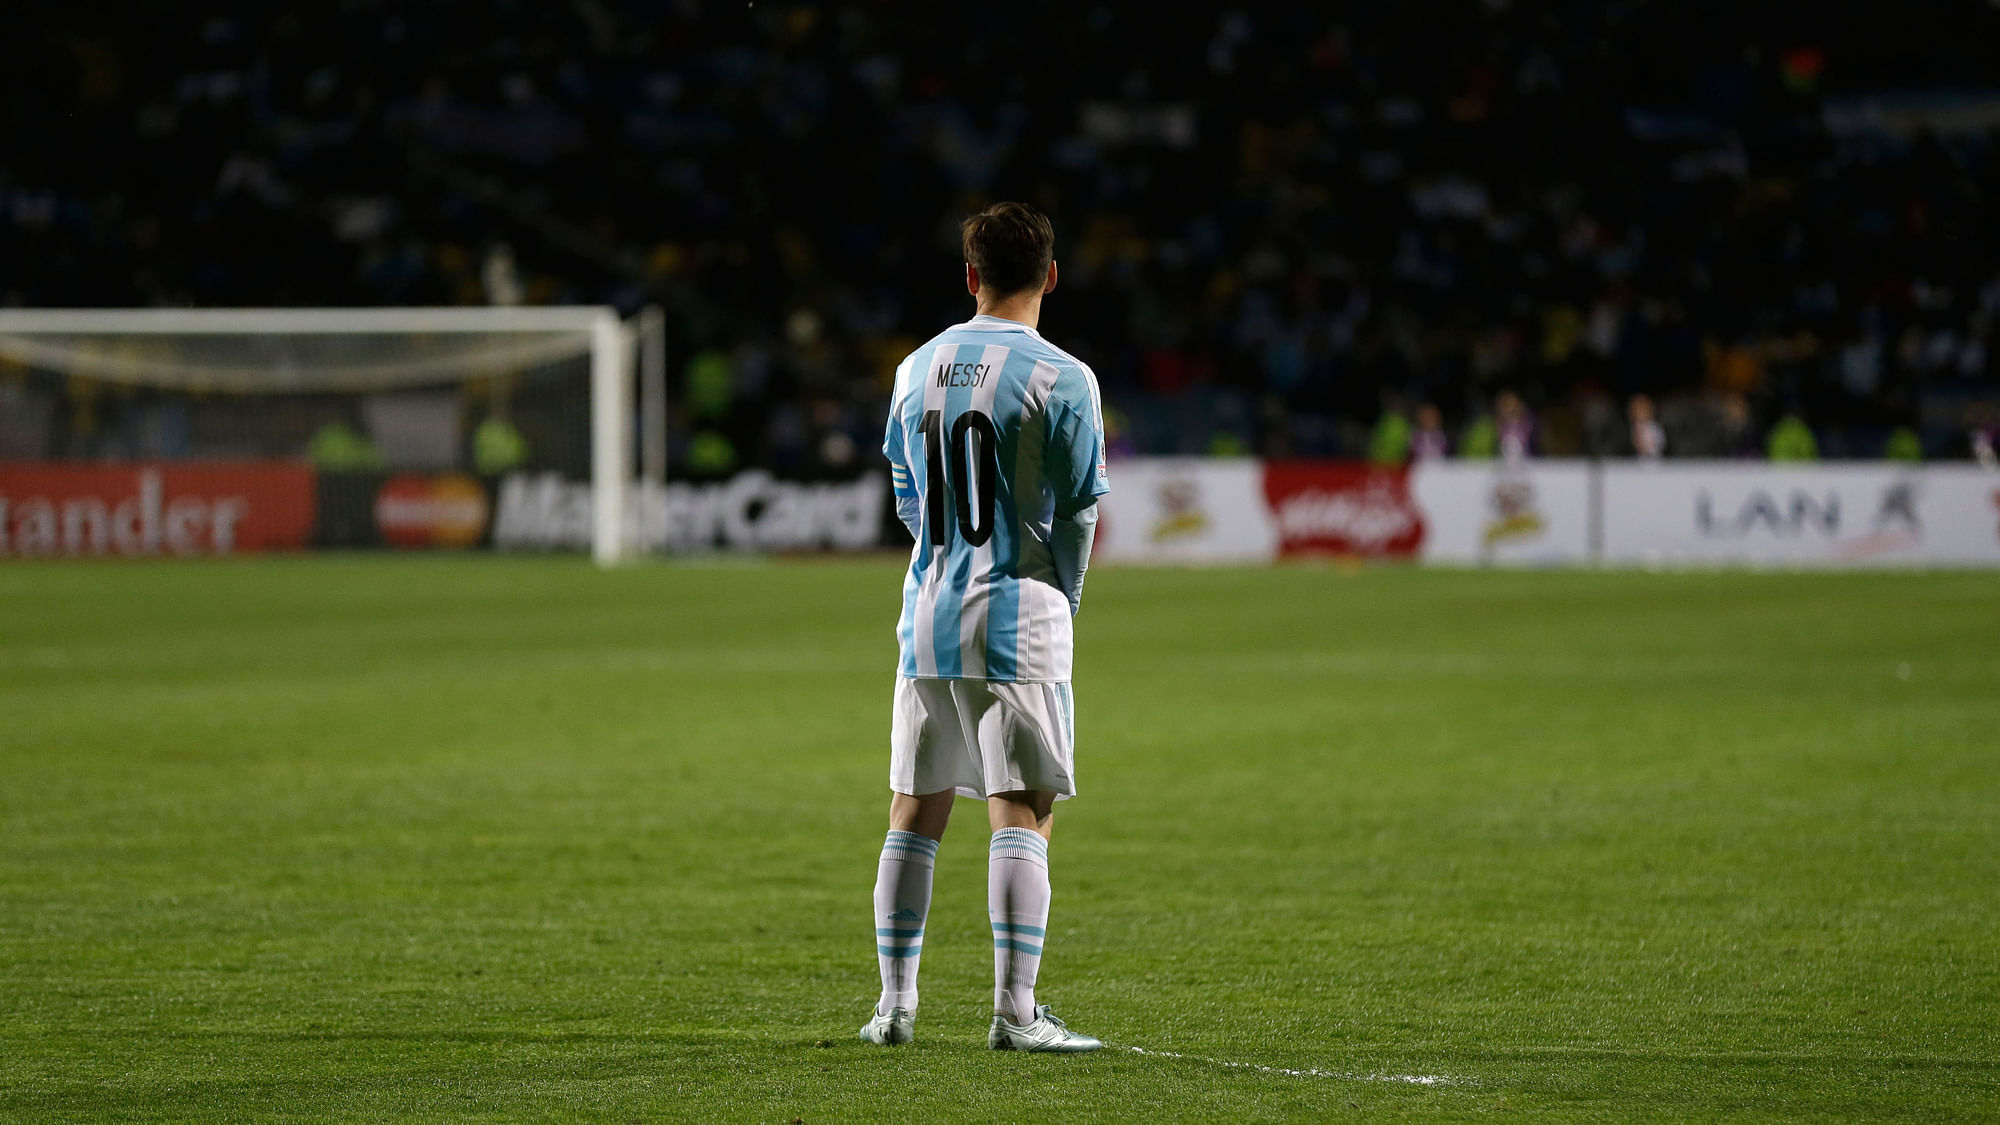 Lionel Messi will lead Argentina against Chile as the team look to end a 22-year long title draught. (Photo: AP)